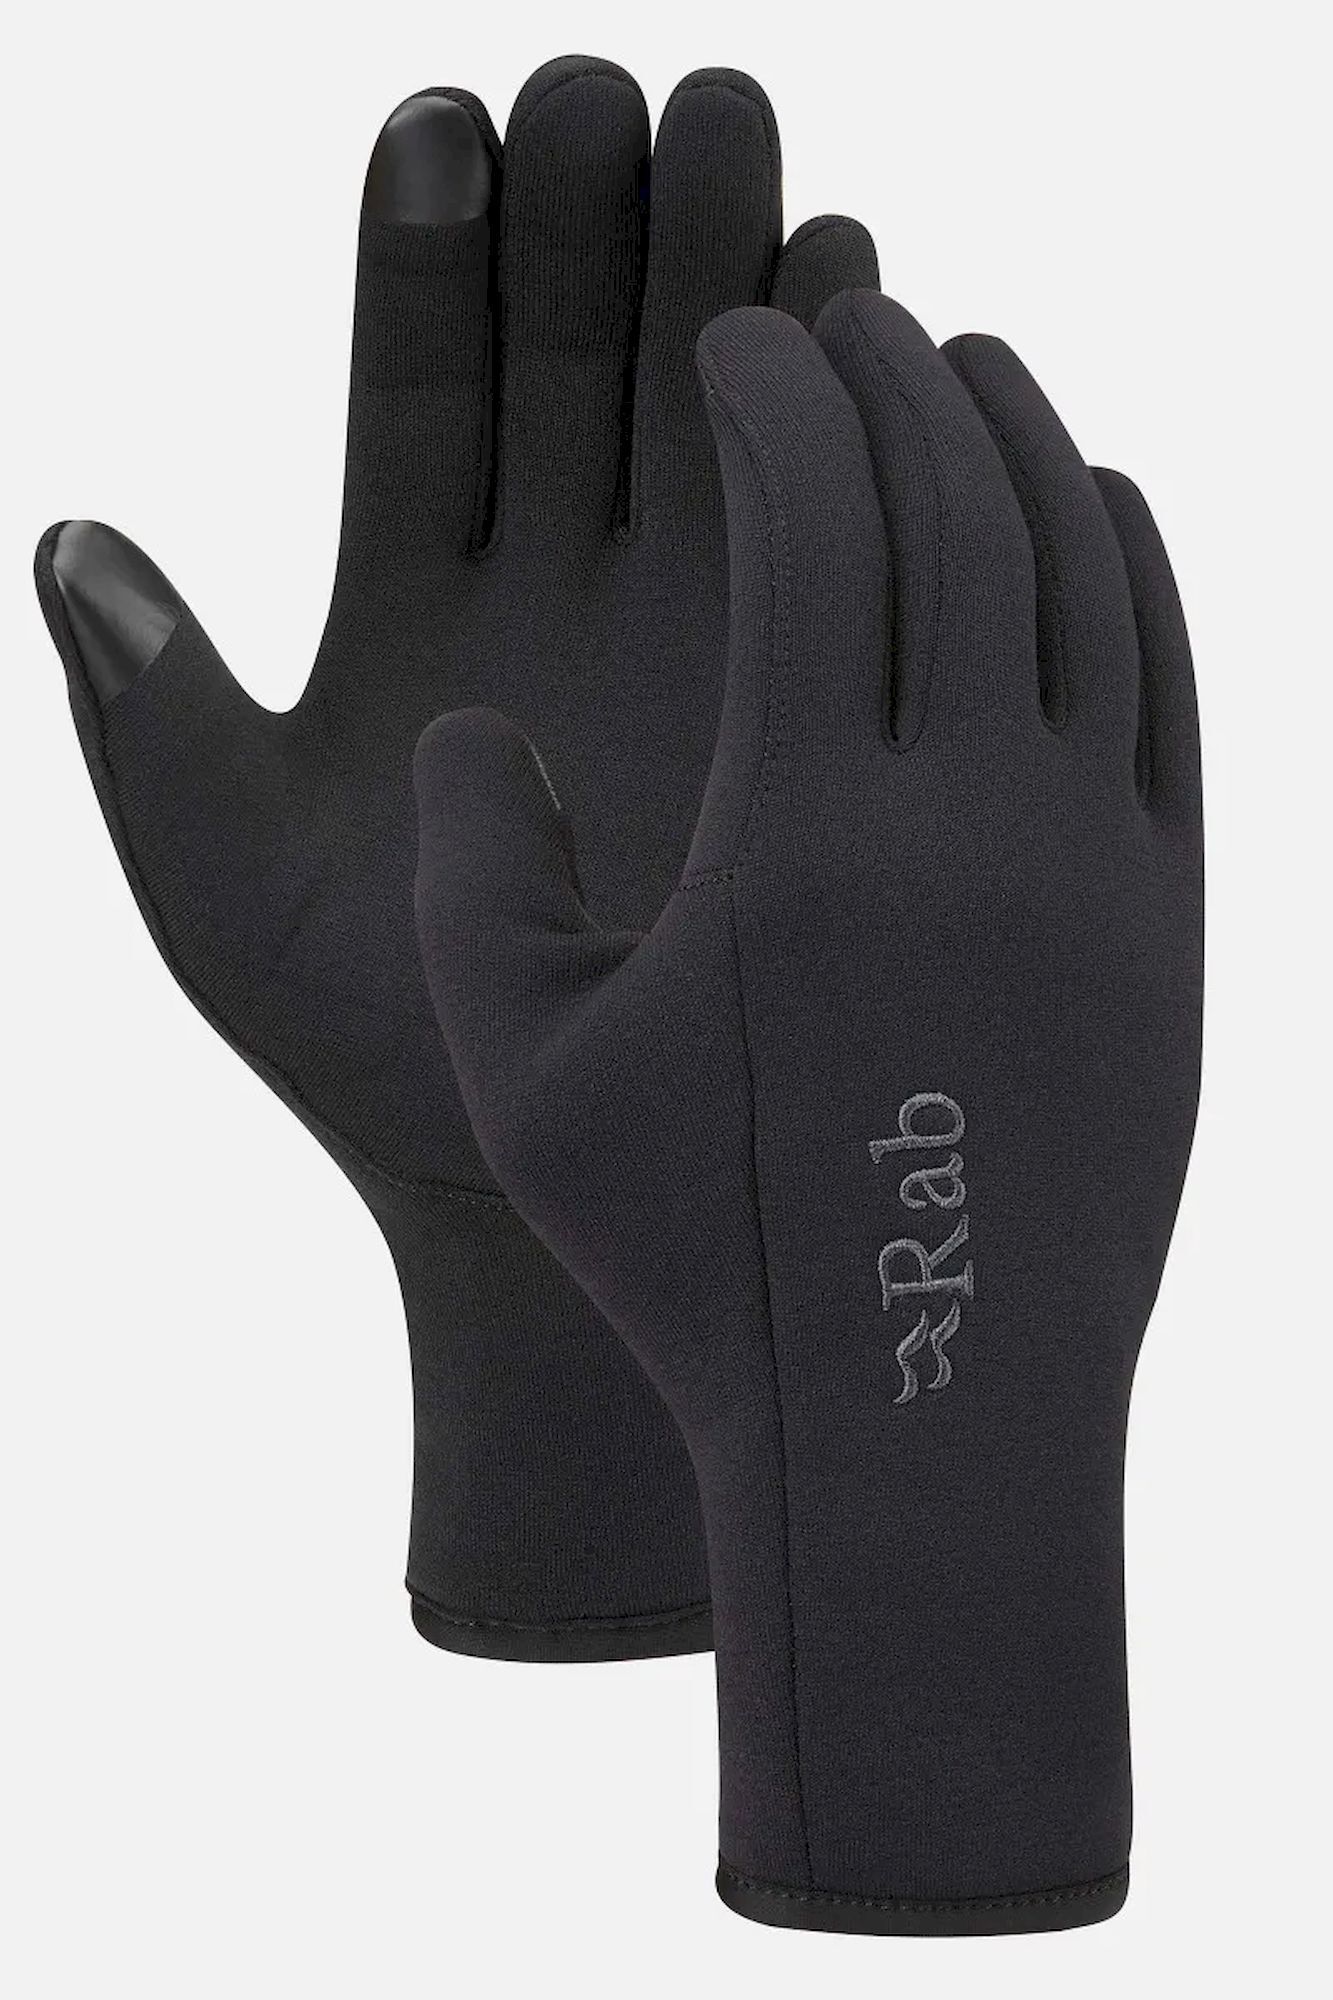 Rab Power Stretch Contact Gloves - Gloves - Men's | Hardloop